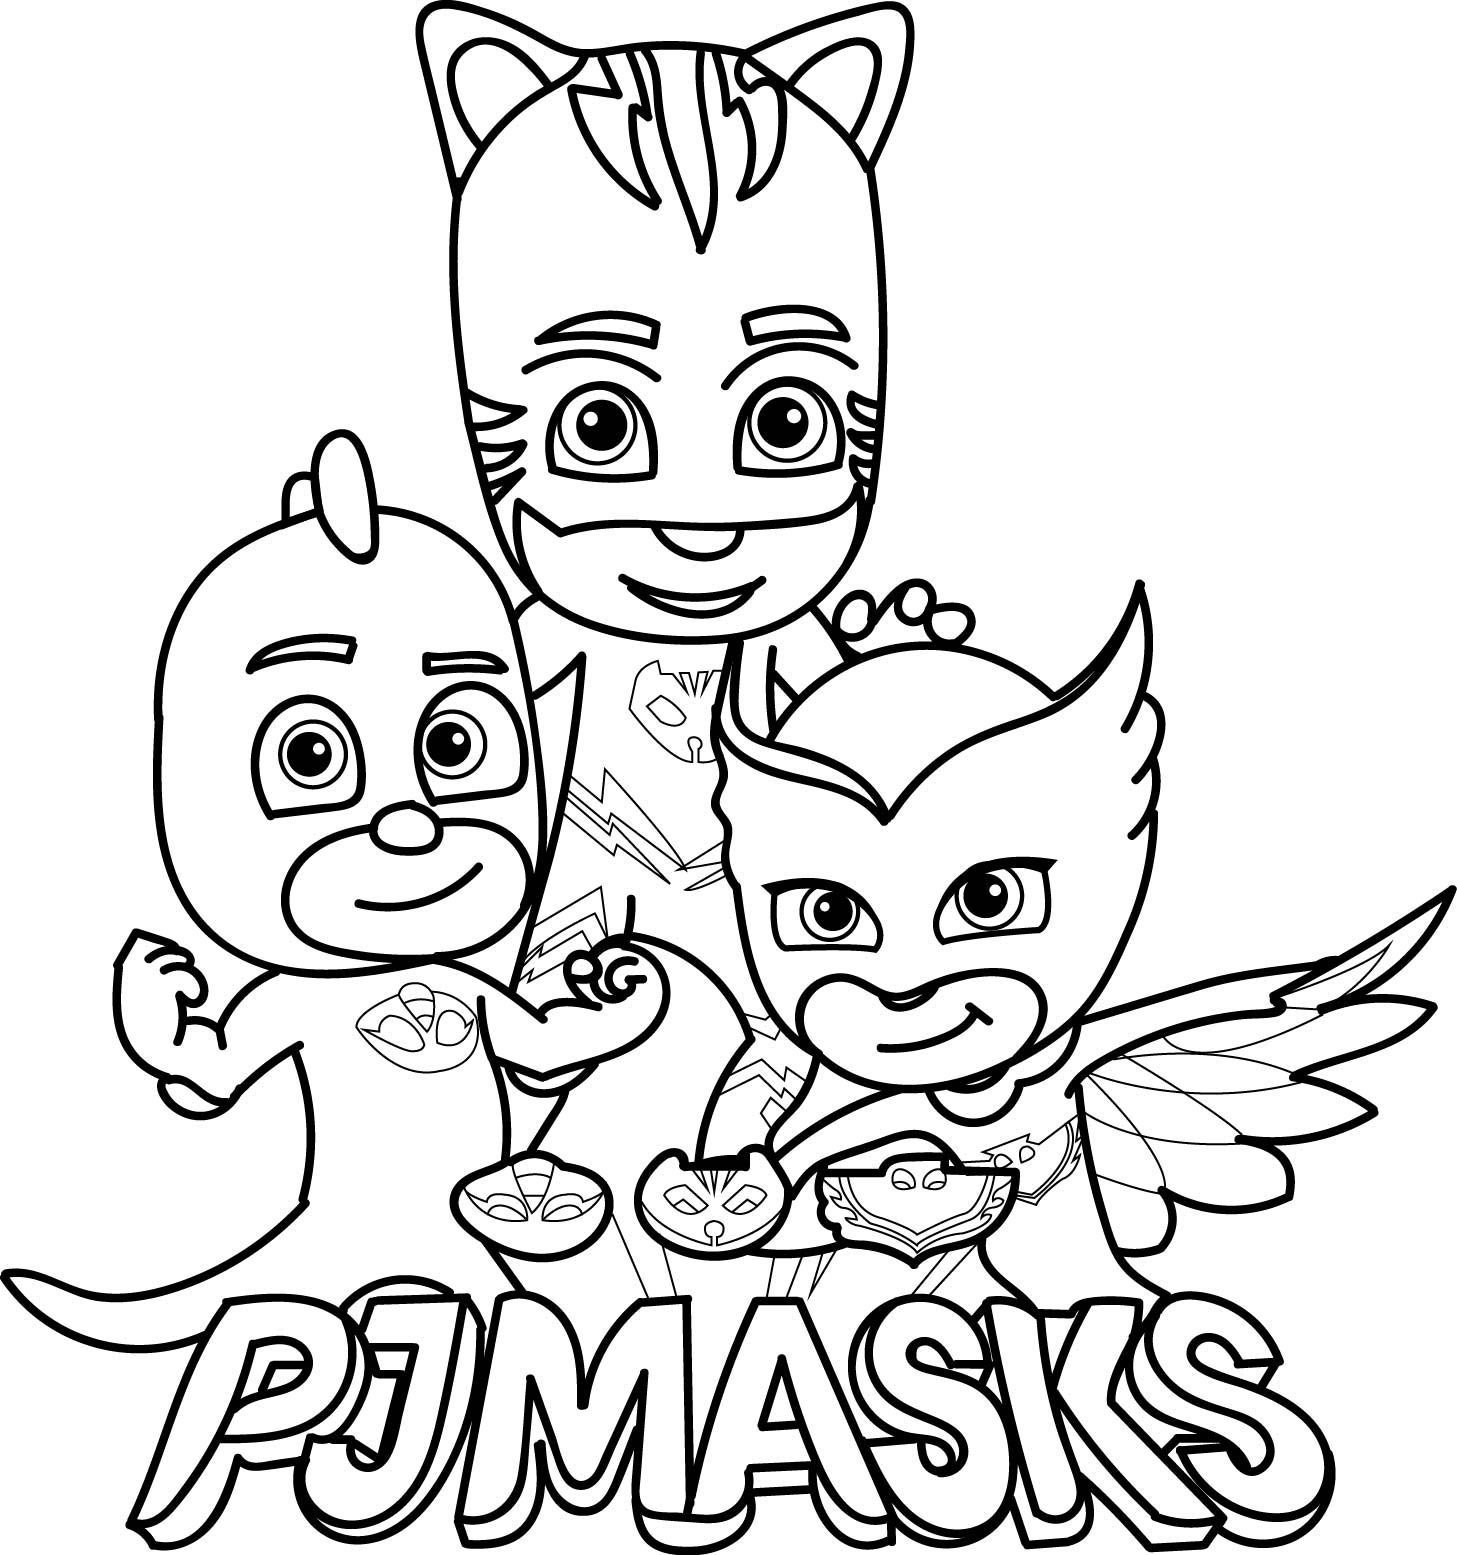 Coloring Pages : Collection Of Pj Masks Coloring Idea Free Mask ...